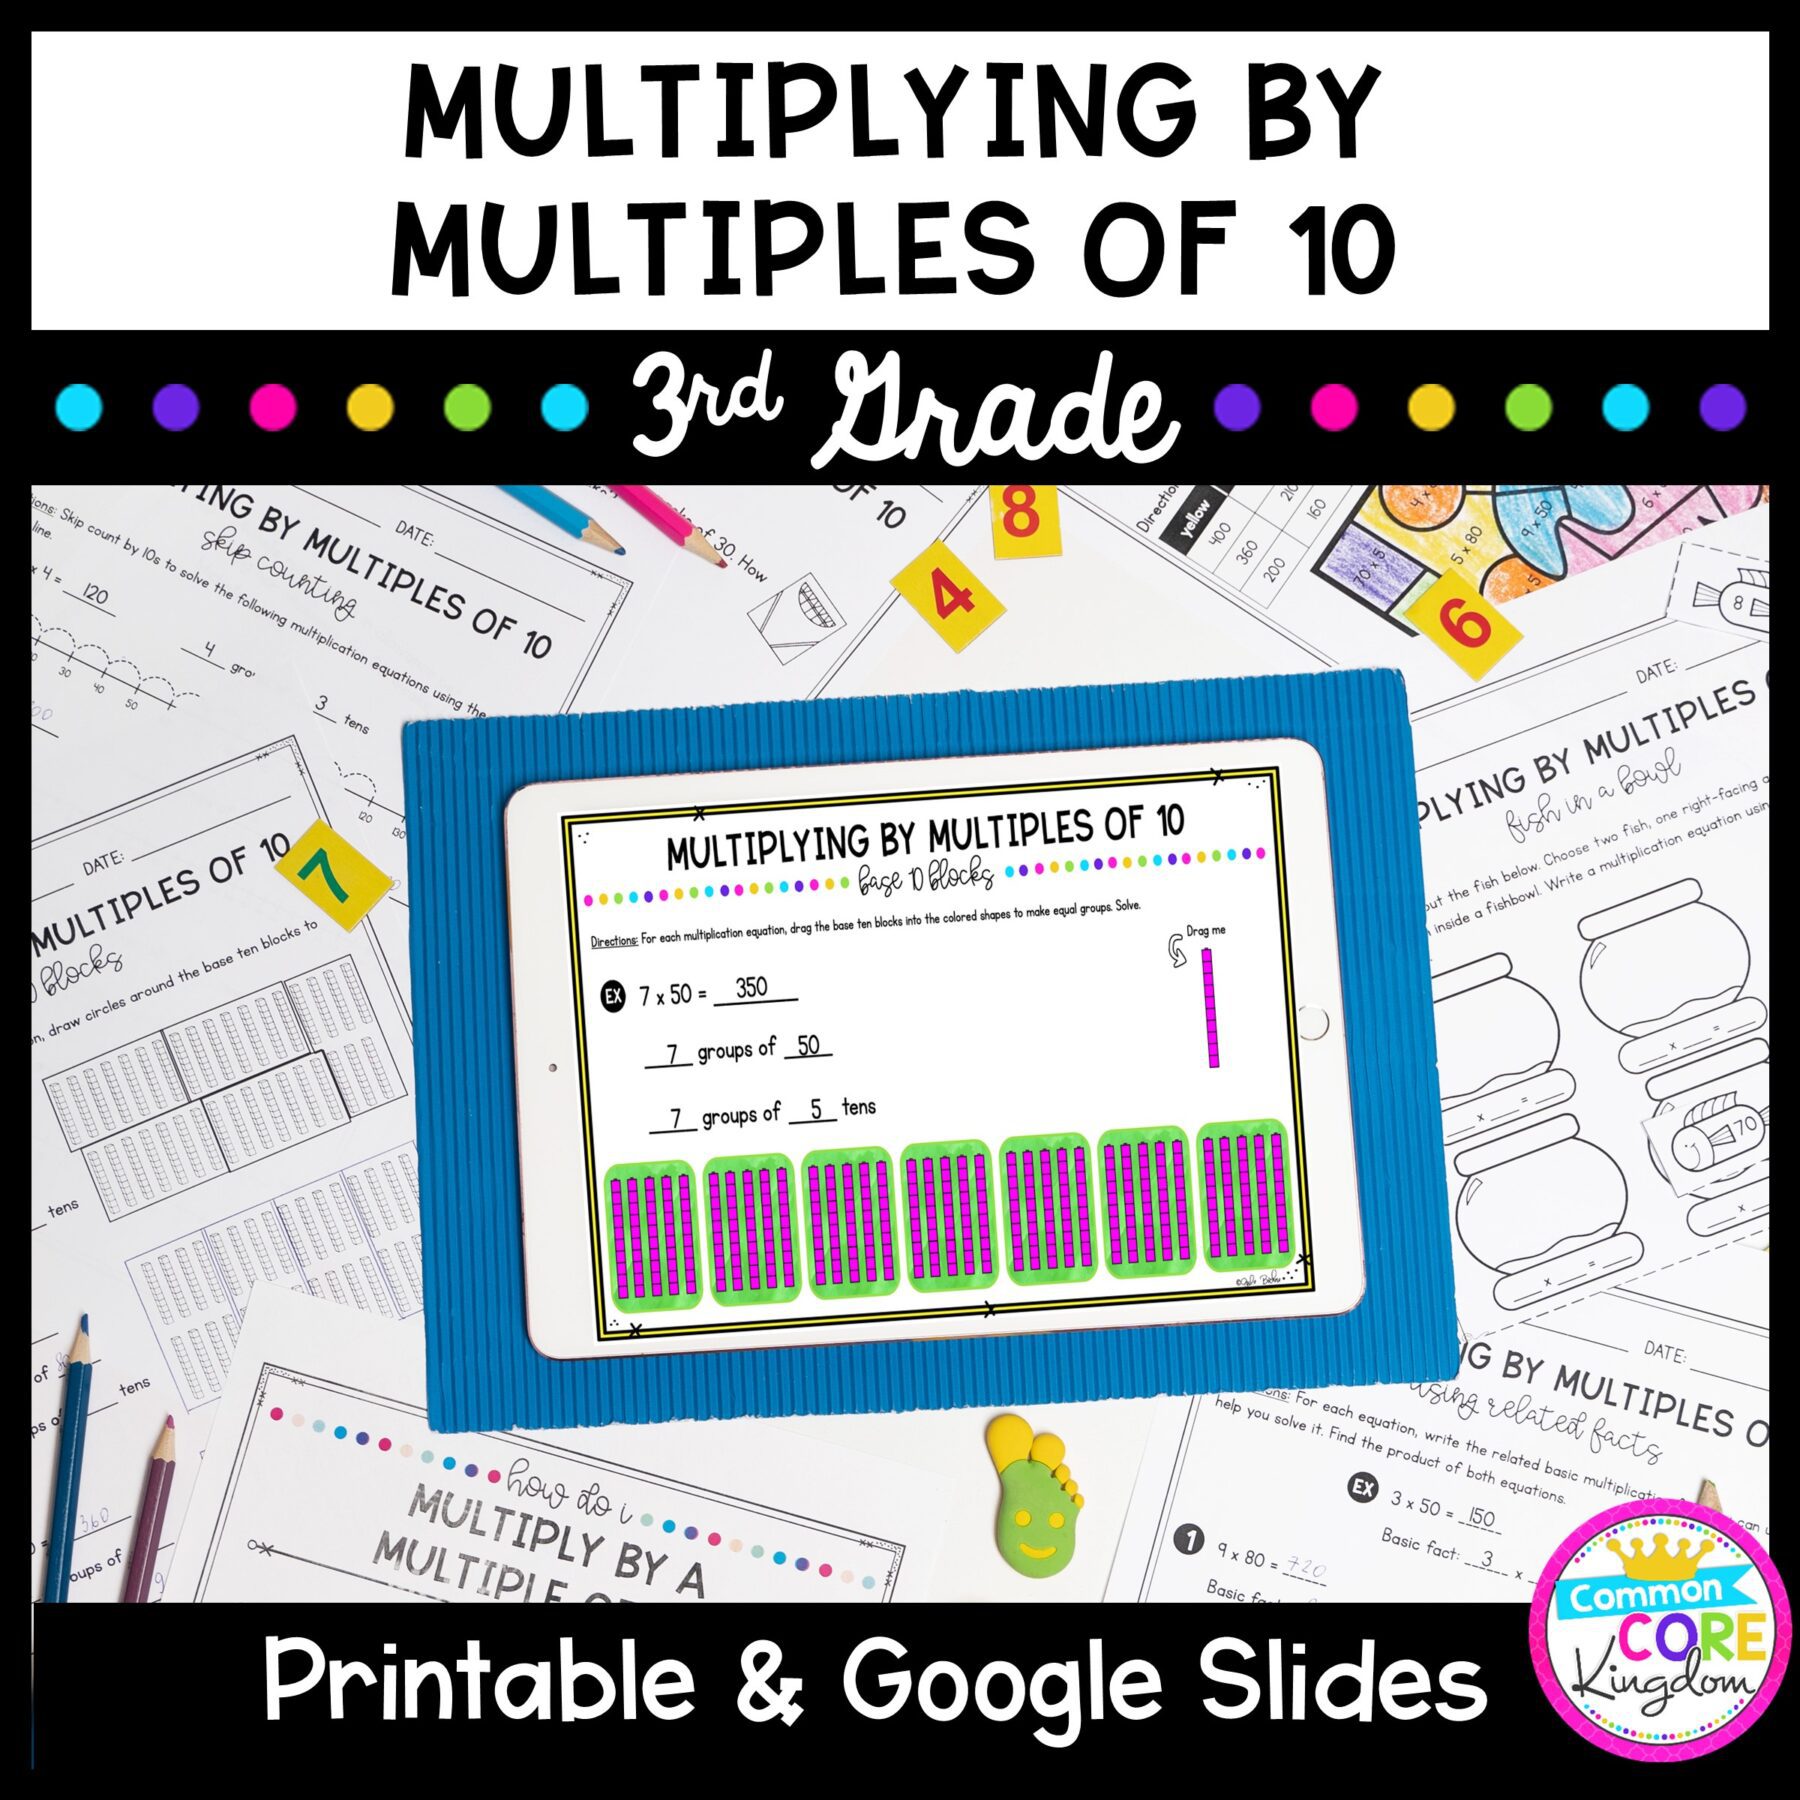 Multiplying by Multiples of 10 for 3rd Grade in Printable and Google Slides Version